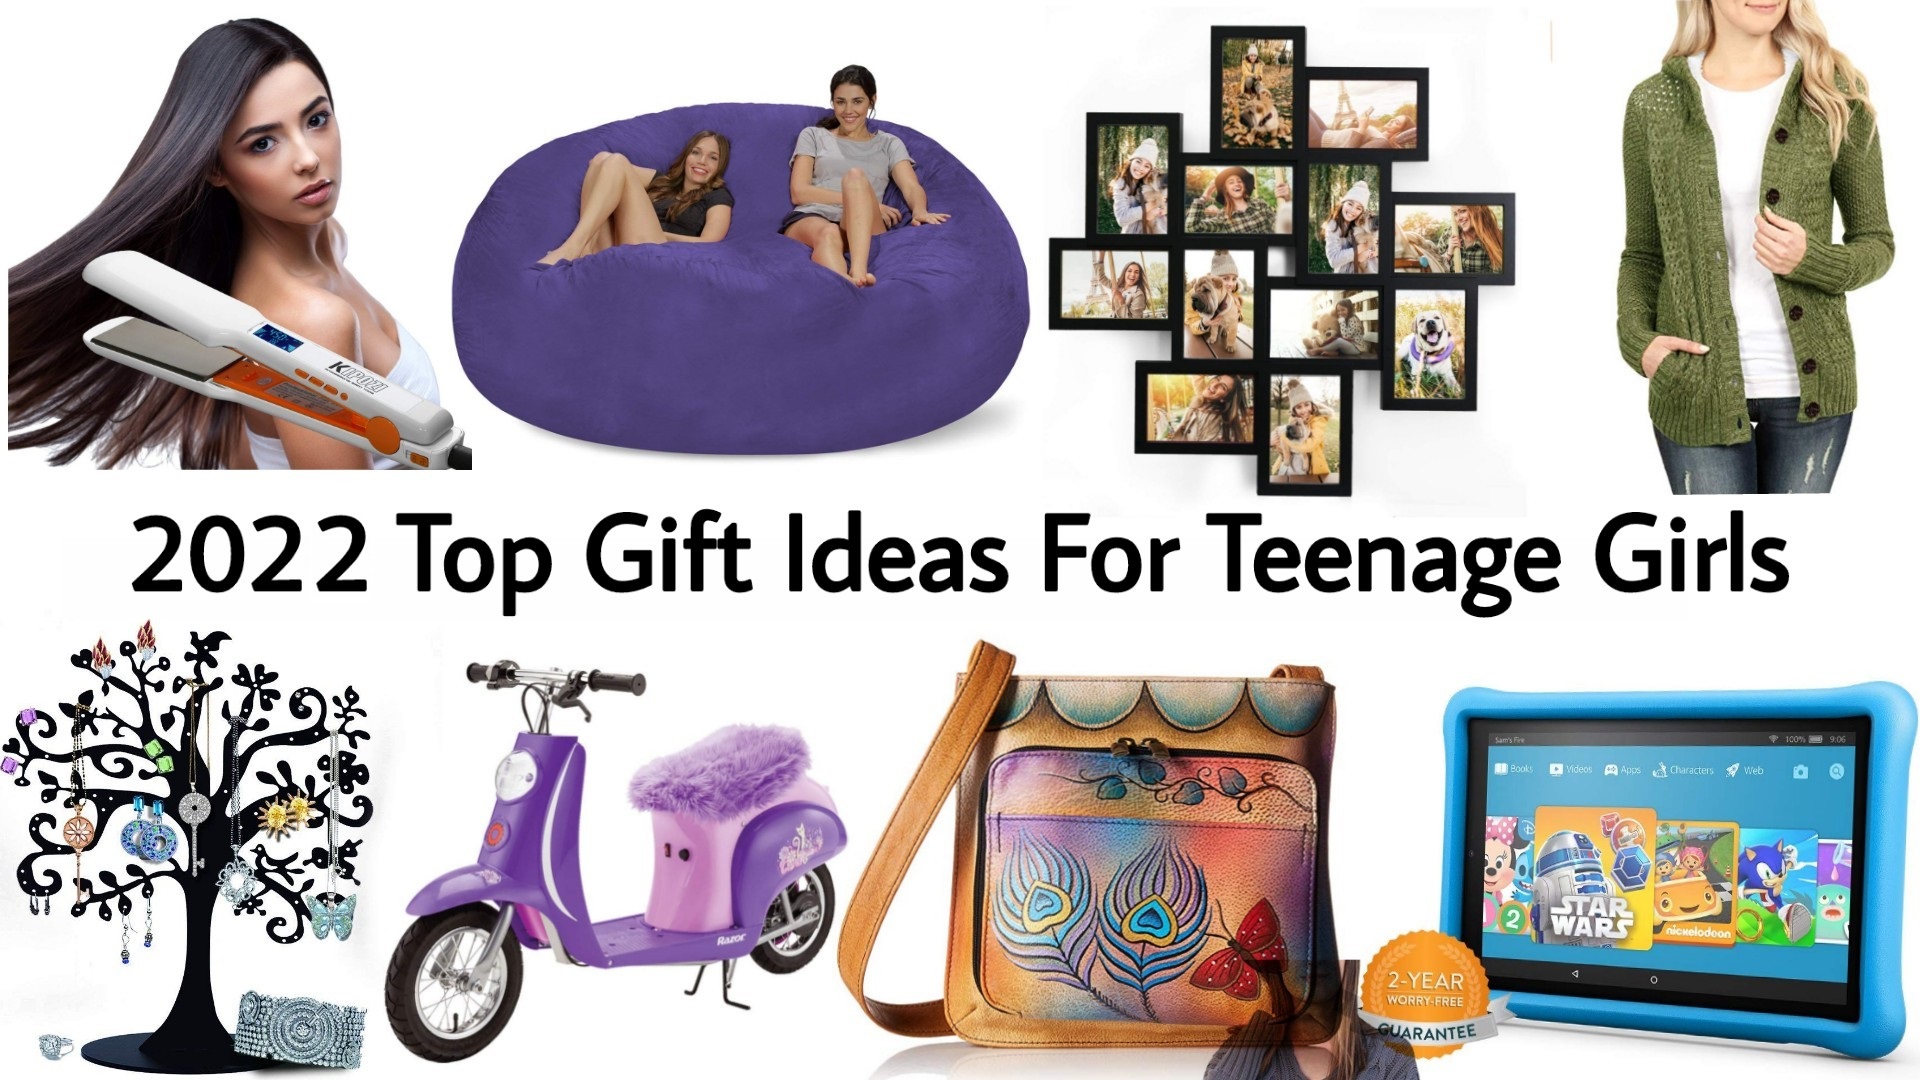 2022 Top Gift Ideas for Teenage Girls | Top 10 Birthday Gifts for Teen Girls 2022